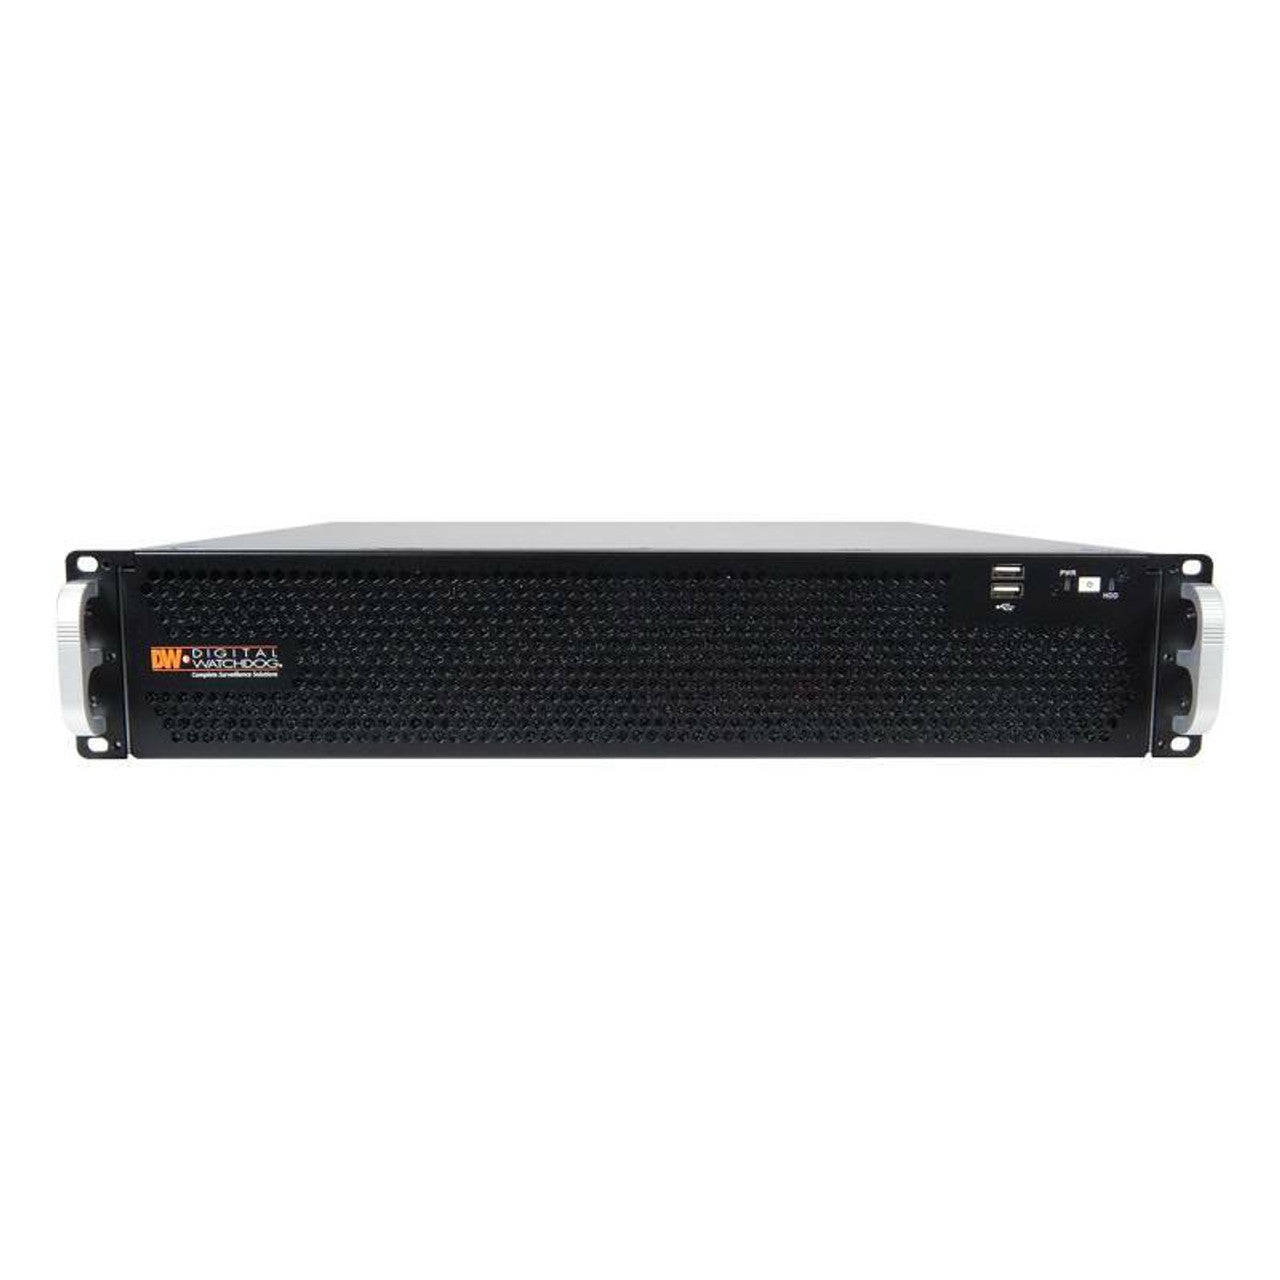 Digital Watchdog DW-BJP2U48T 128- Channel NVR with 48TB HDD included, Up to 128 Channel, Blackjack P-Rack